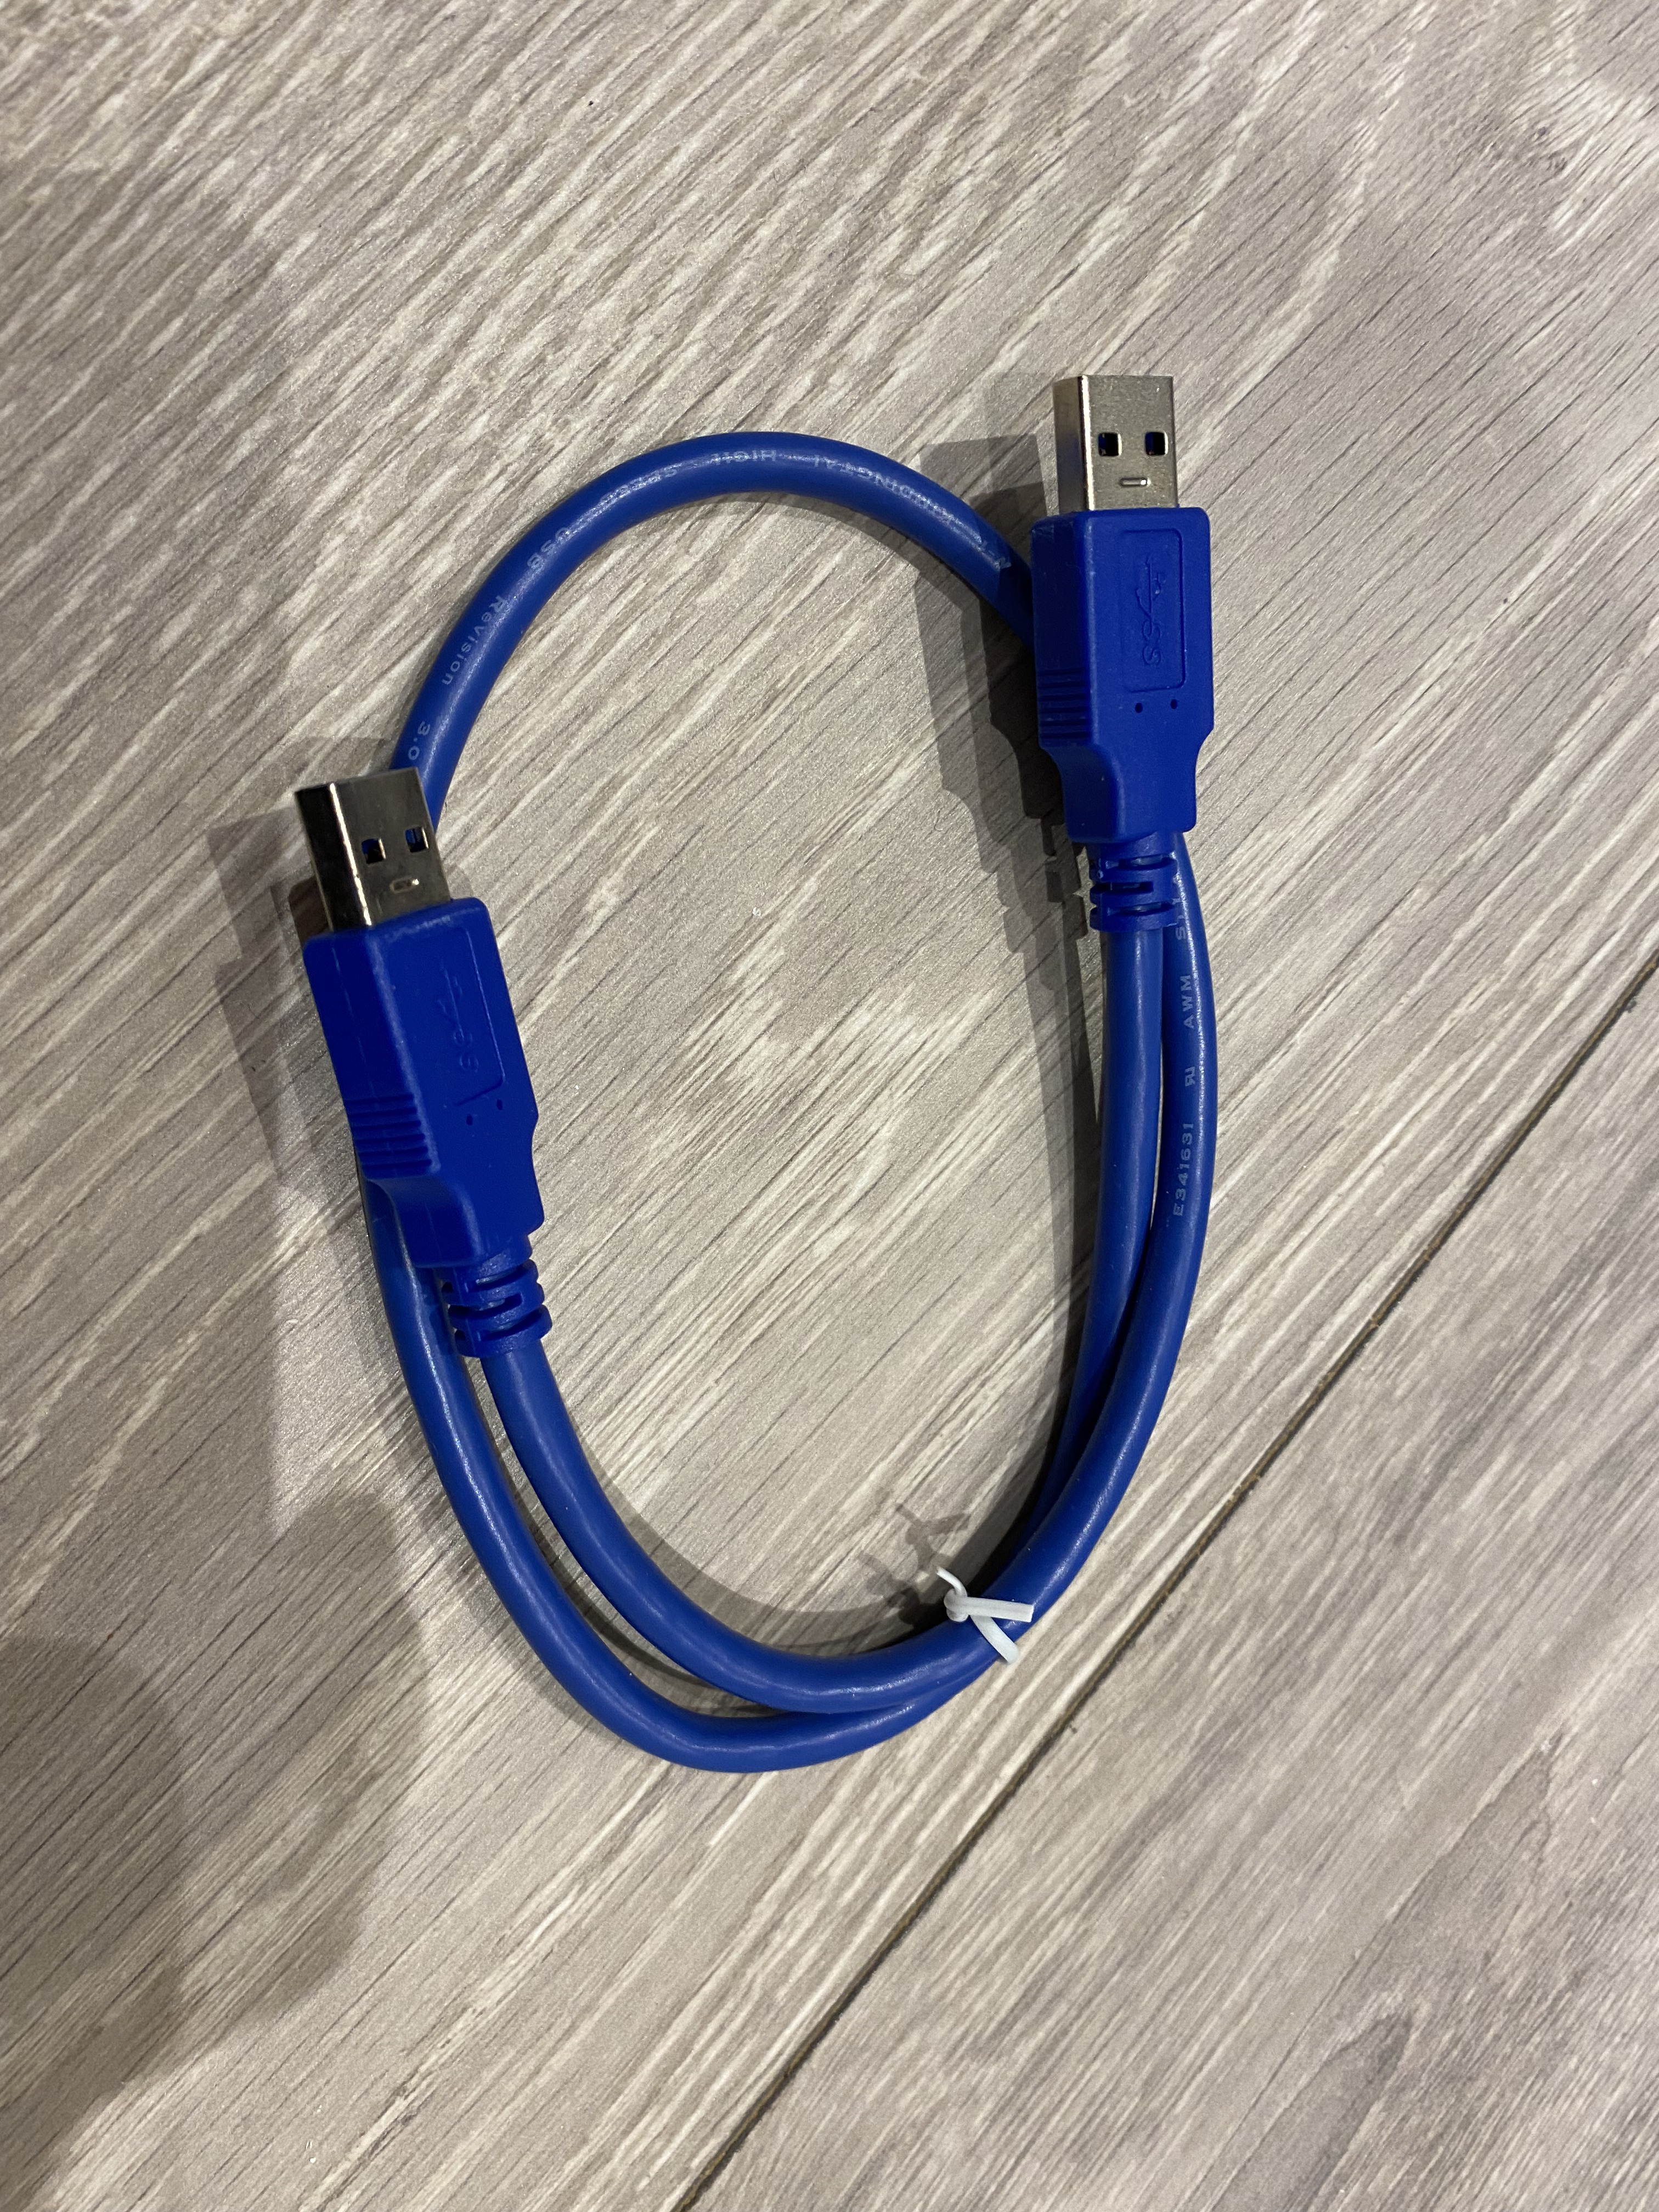 USB 3.0 To 3.0 Cable (30cm)